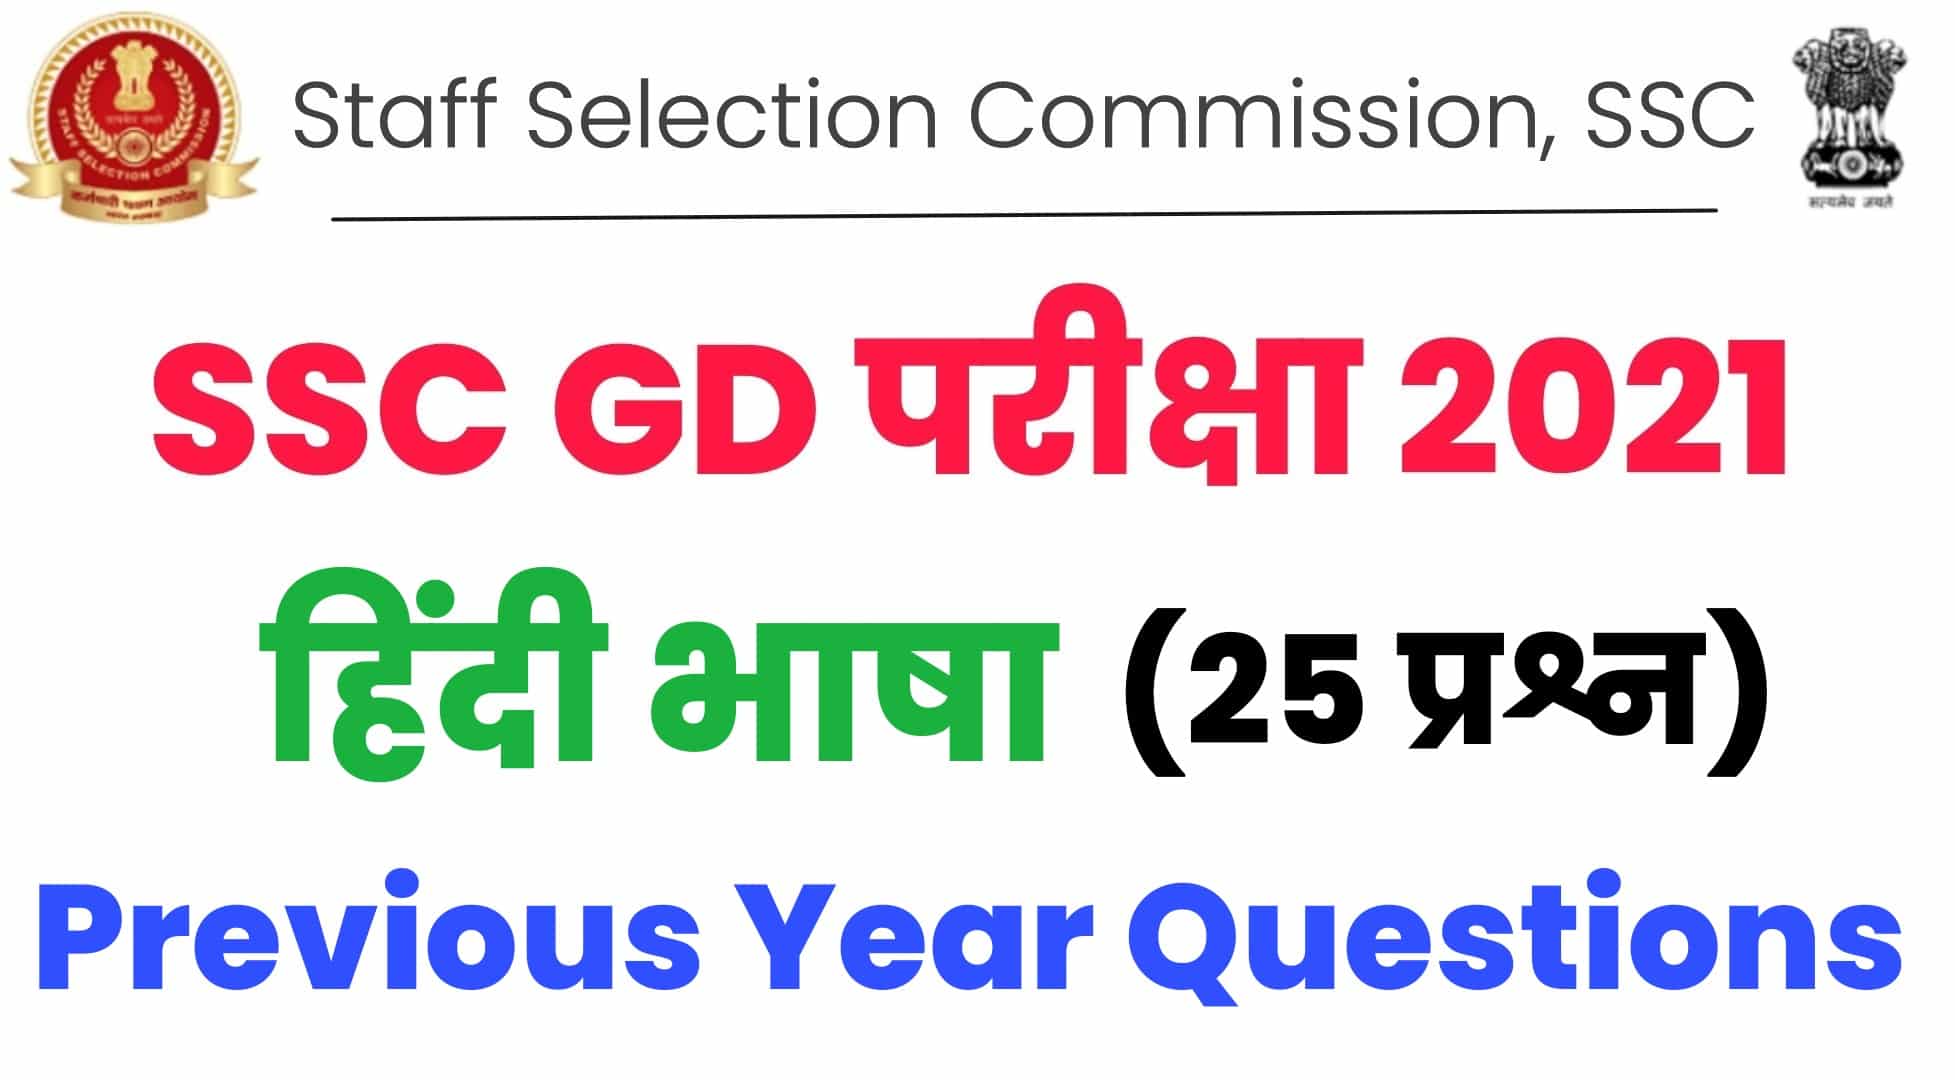 ssc gd previous year questions